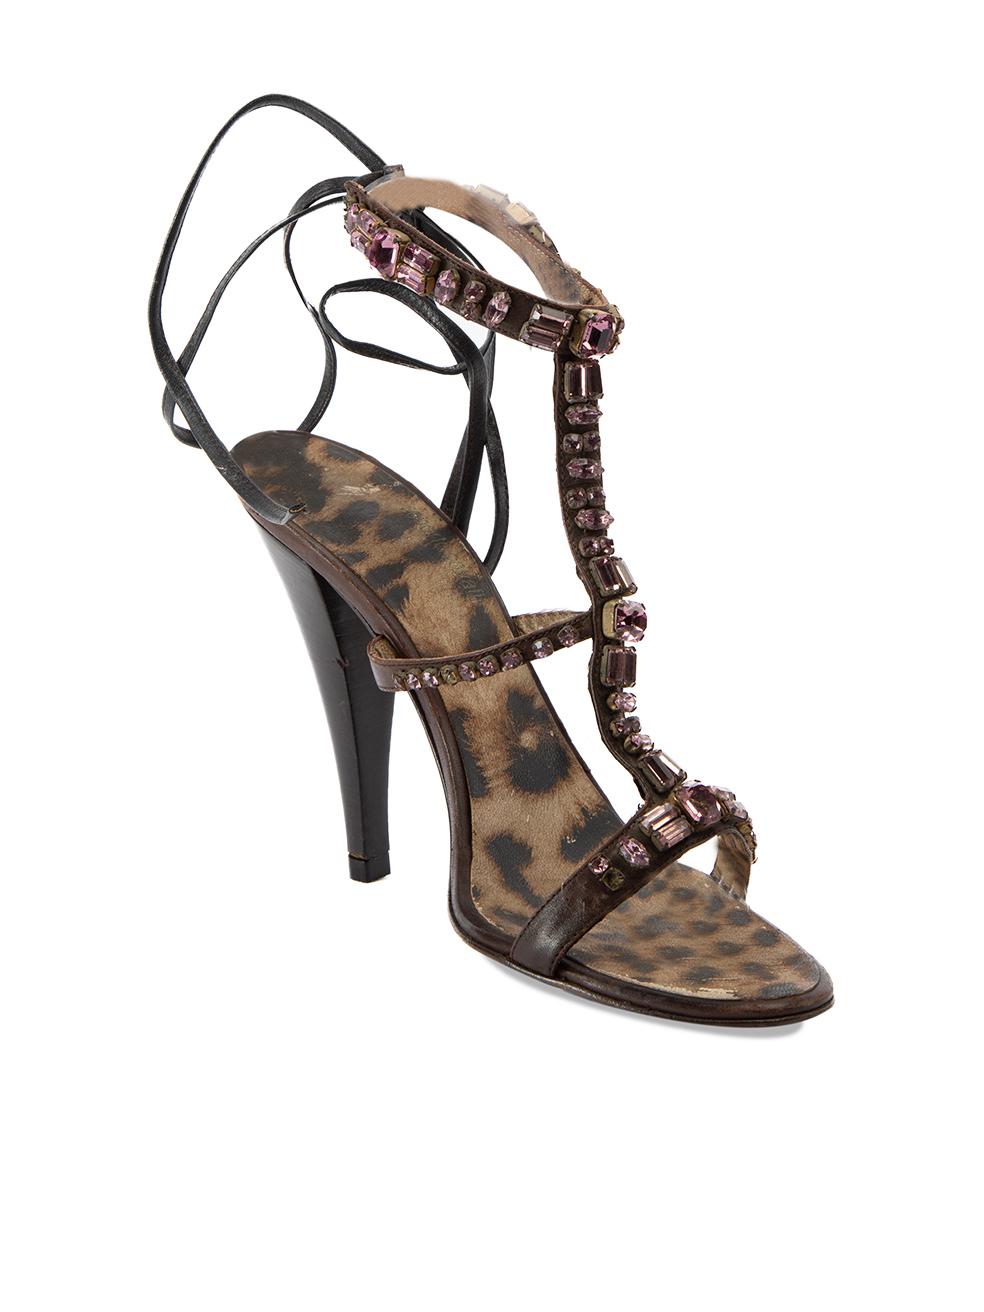 CONDITION is Very good. Minimal wear to heels is evident. Wear to inner soles is seen on this used Roberto Cavalli designer resale item. Details Brown Leather Strappy sandals Peep toe High heel Purple gemstone embellished straps Tie straps closure